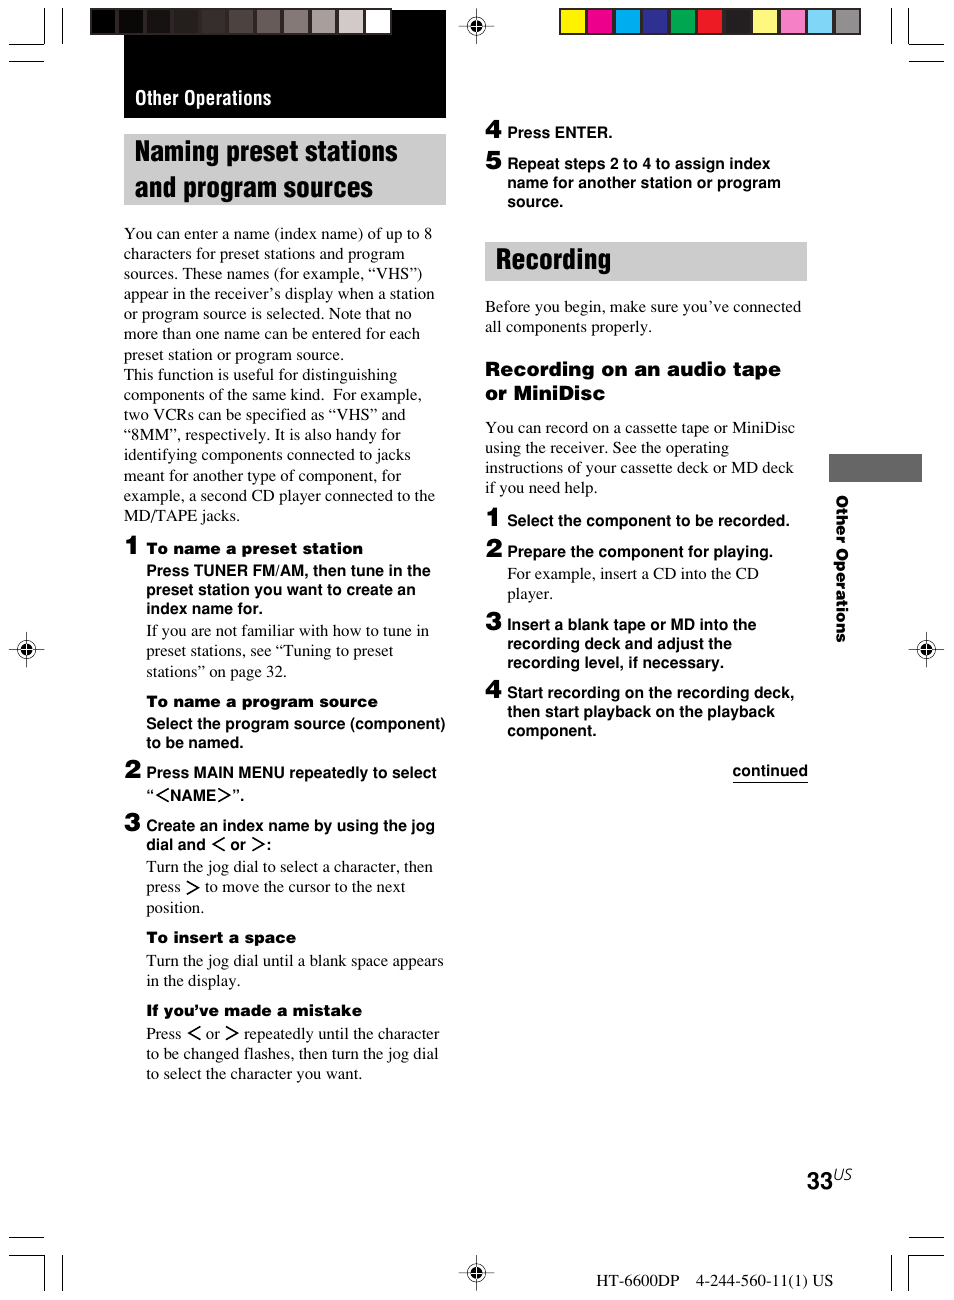 Other operations, Naming preset stations and program, Sources | Recording, Naming preset stations and program sources | Sony HT-6600DP User Manual | Page 33 / 52